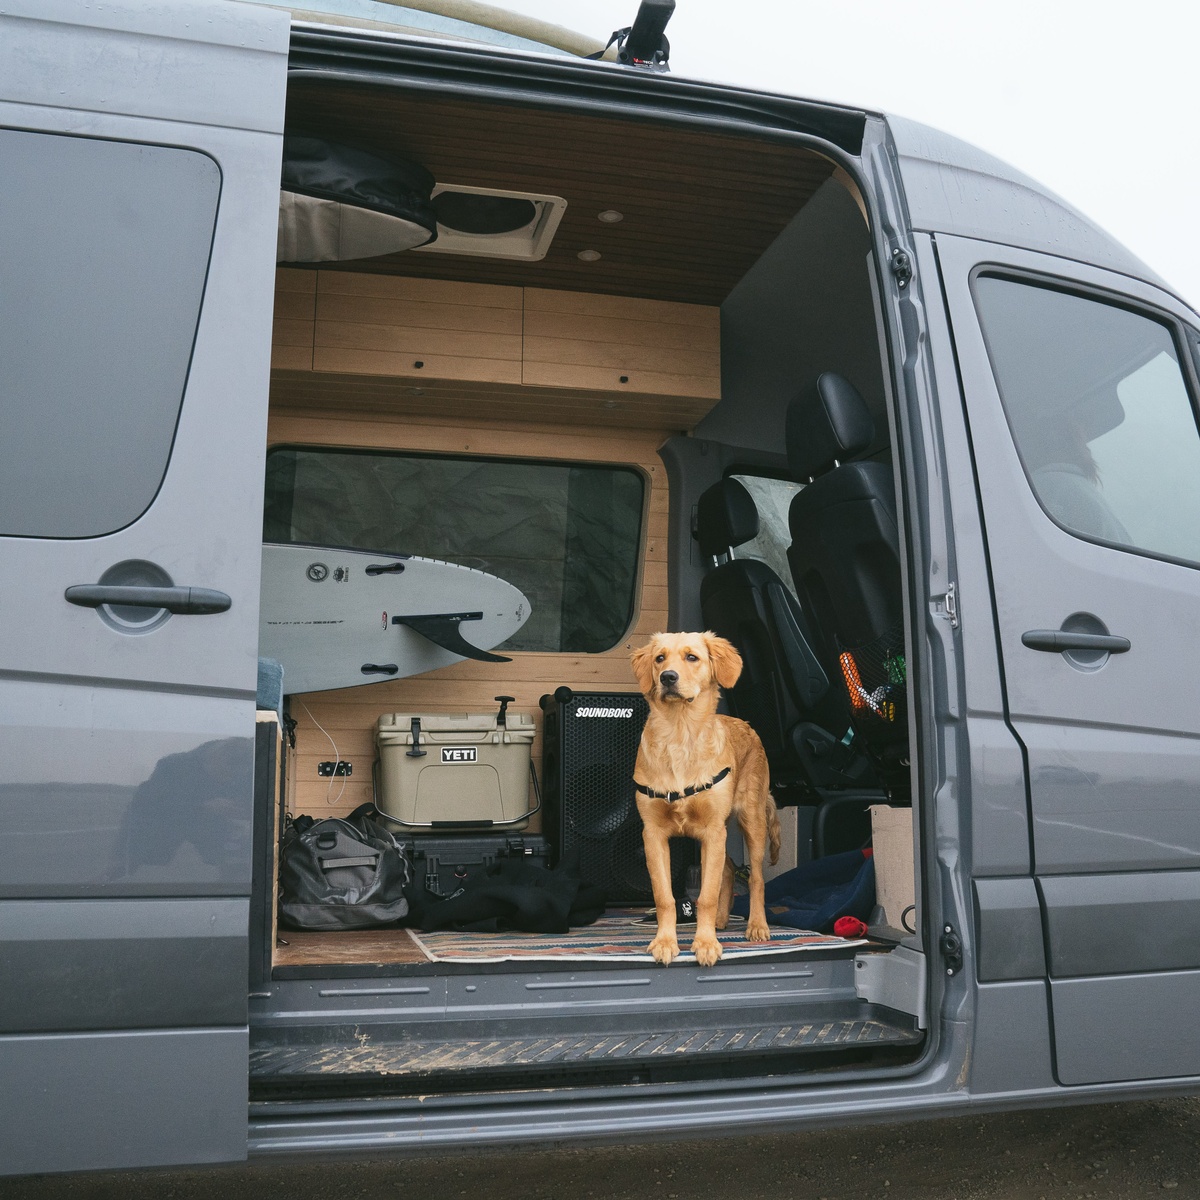 SOUNDBOKS in a van with a surfboard and puppy